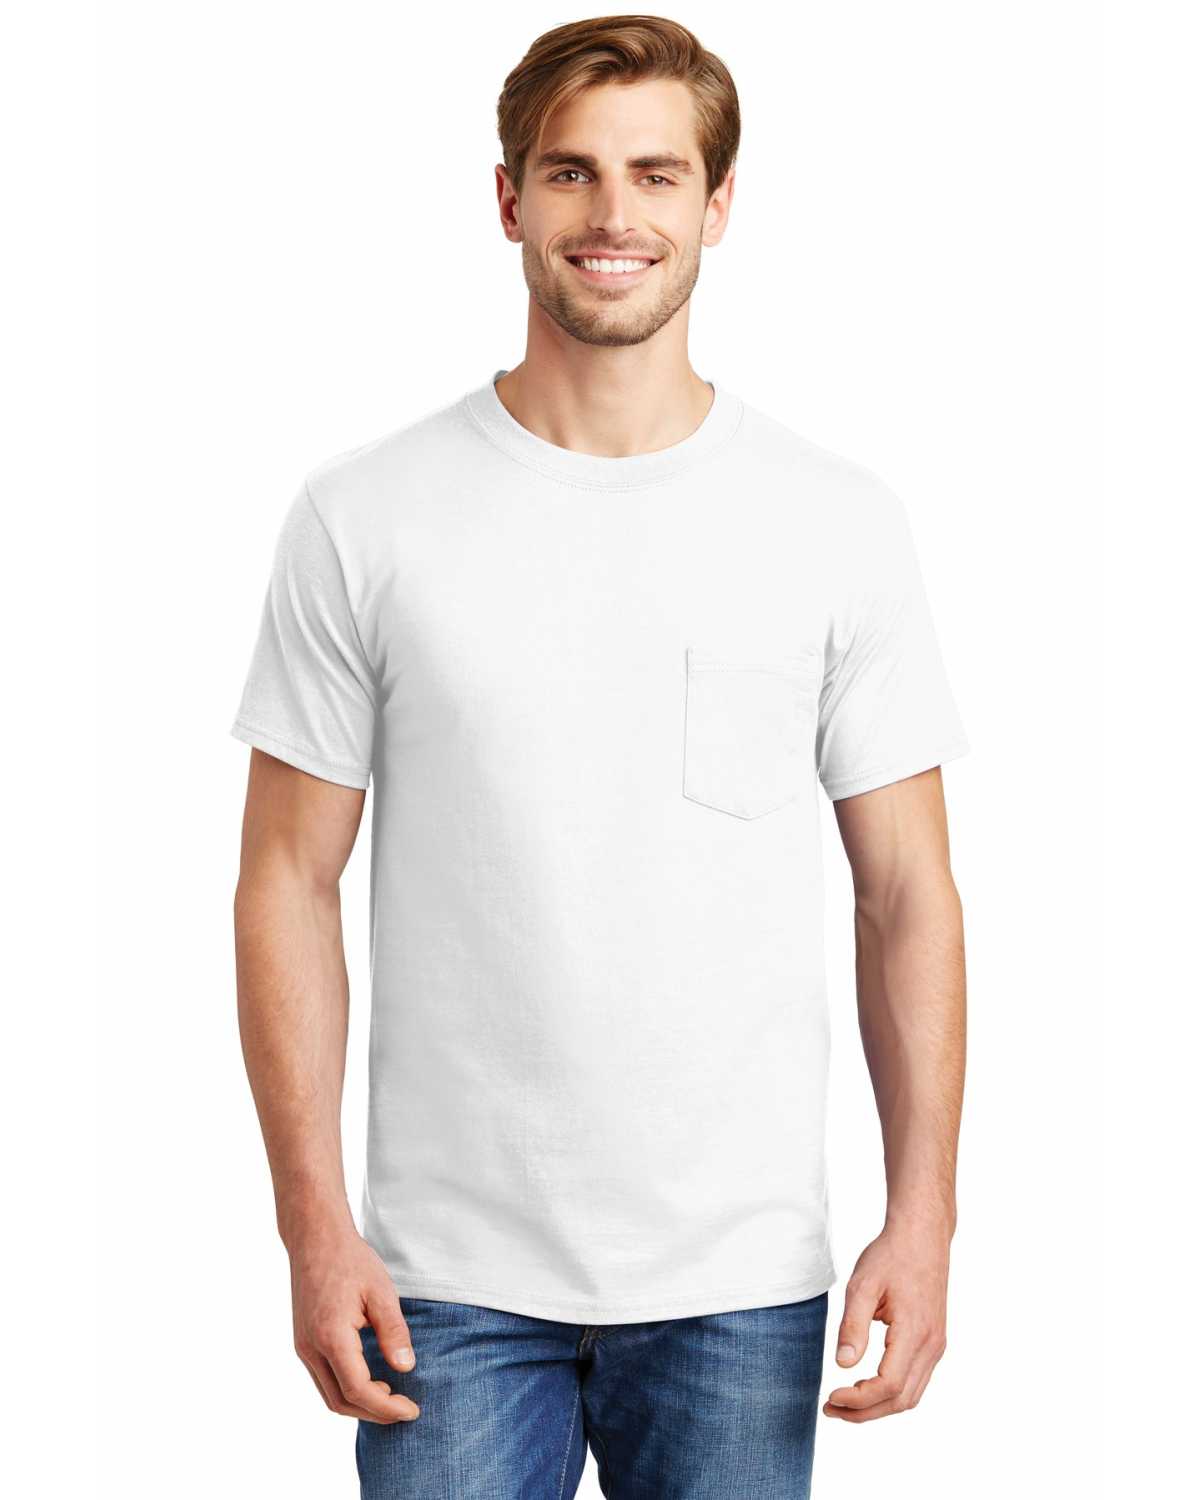 Hanes 5190 Beefy-T 100% Cotton T-Shirt with Pocket on discount ...